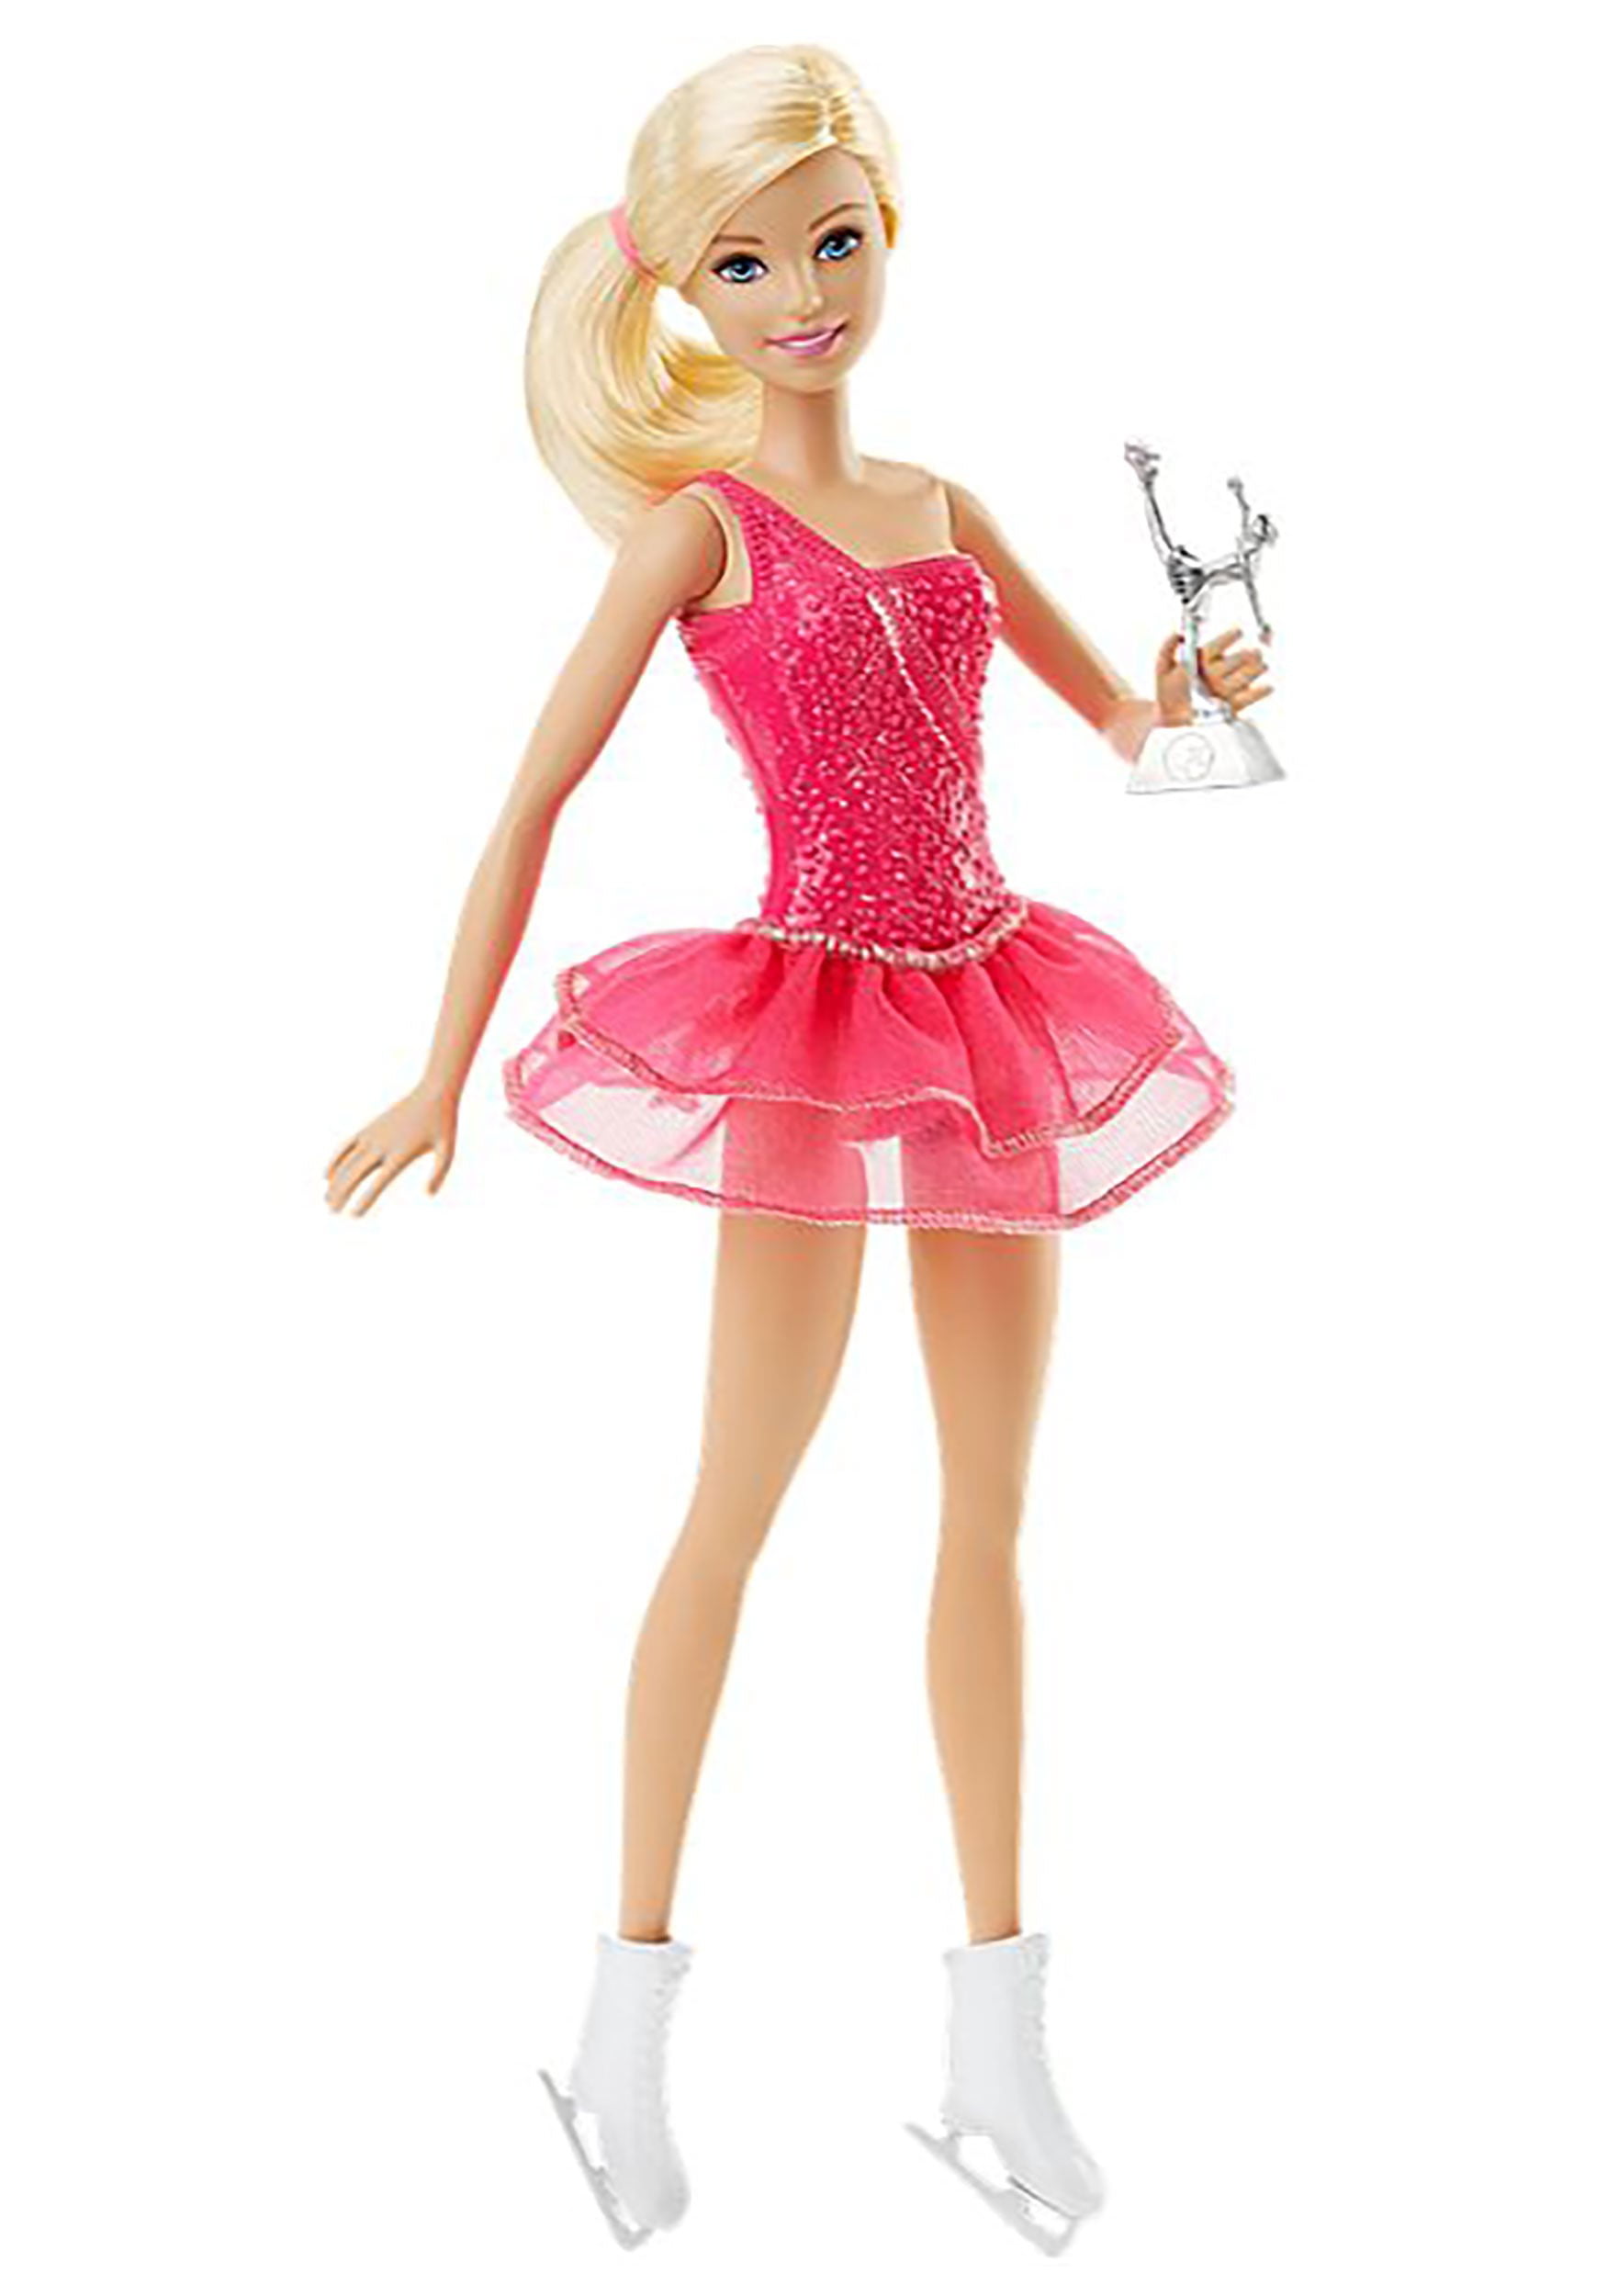 Barbie Clothes Gymnast Leotard with Hoop & Water Bottle Career Outfit 